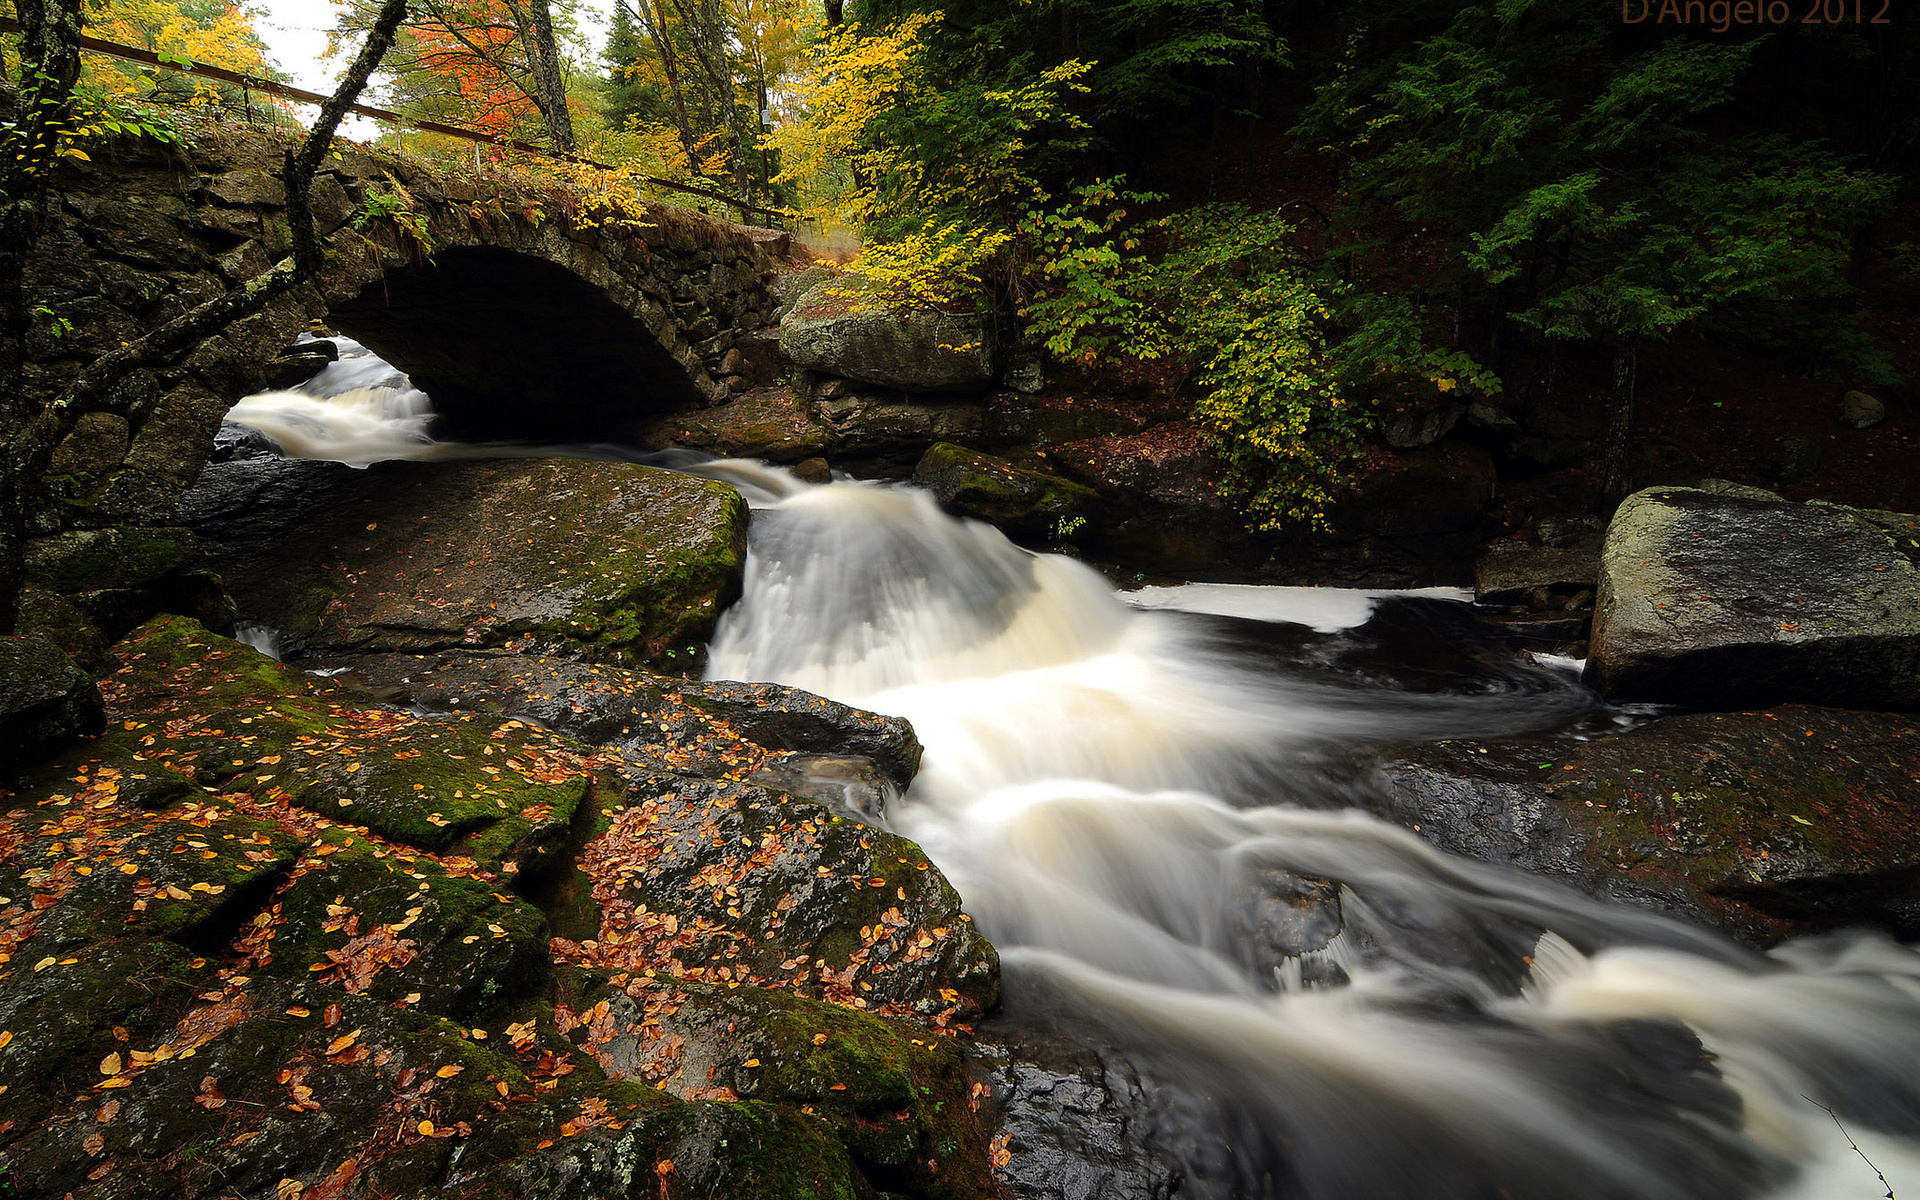 nature, Landscape, Waterfall, Water, Stream, Rocks, Leaves, Timelapse, Trees, Forest, Autumn, Fall, Seasons, Sceni Wallpaper